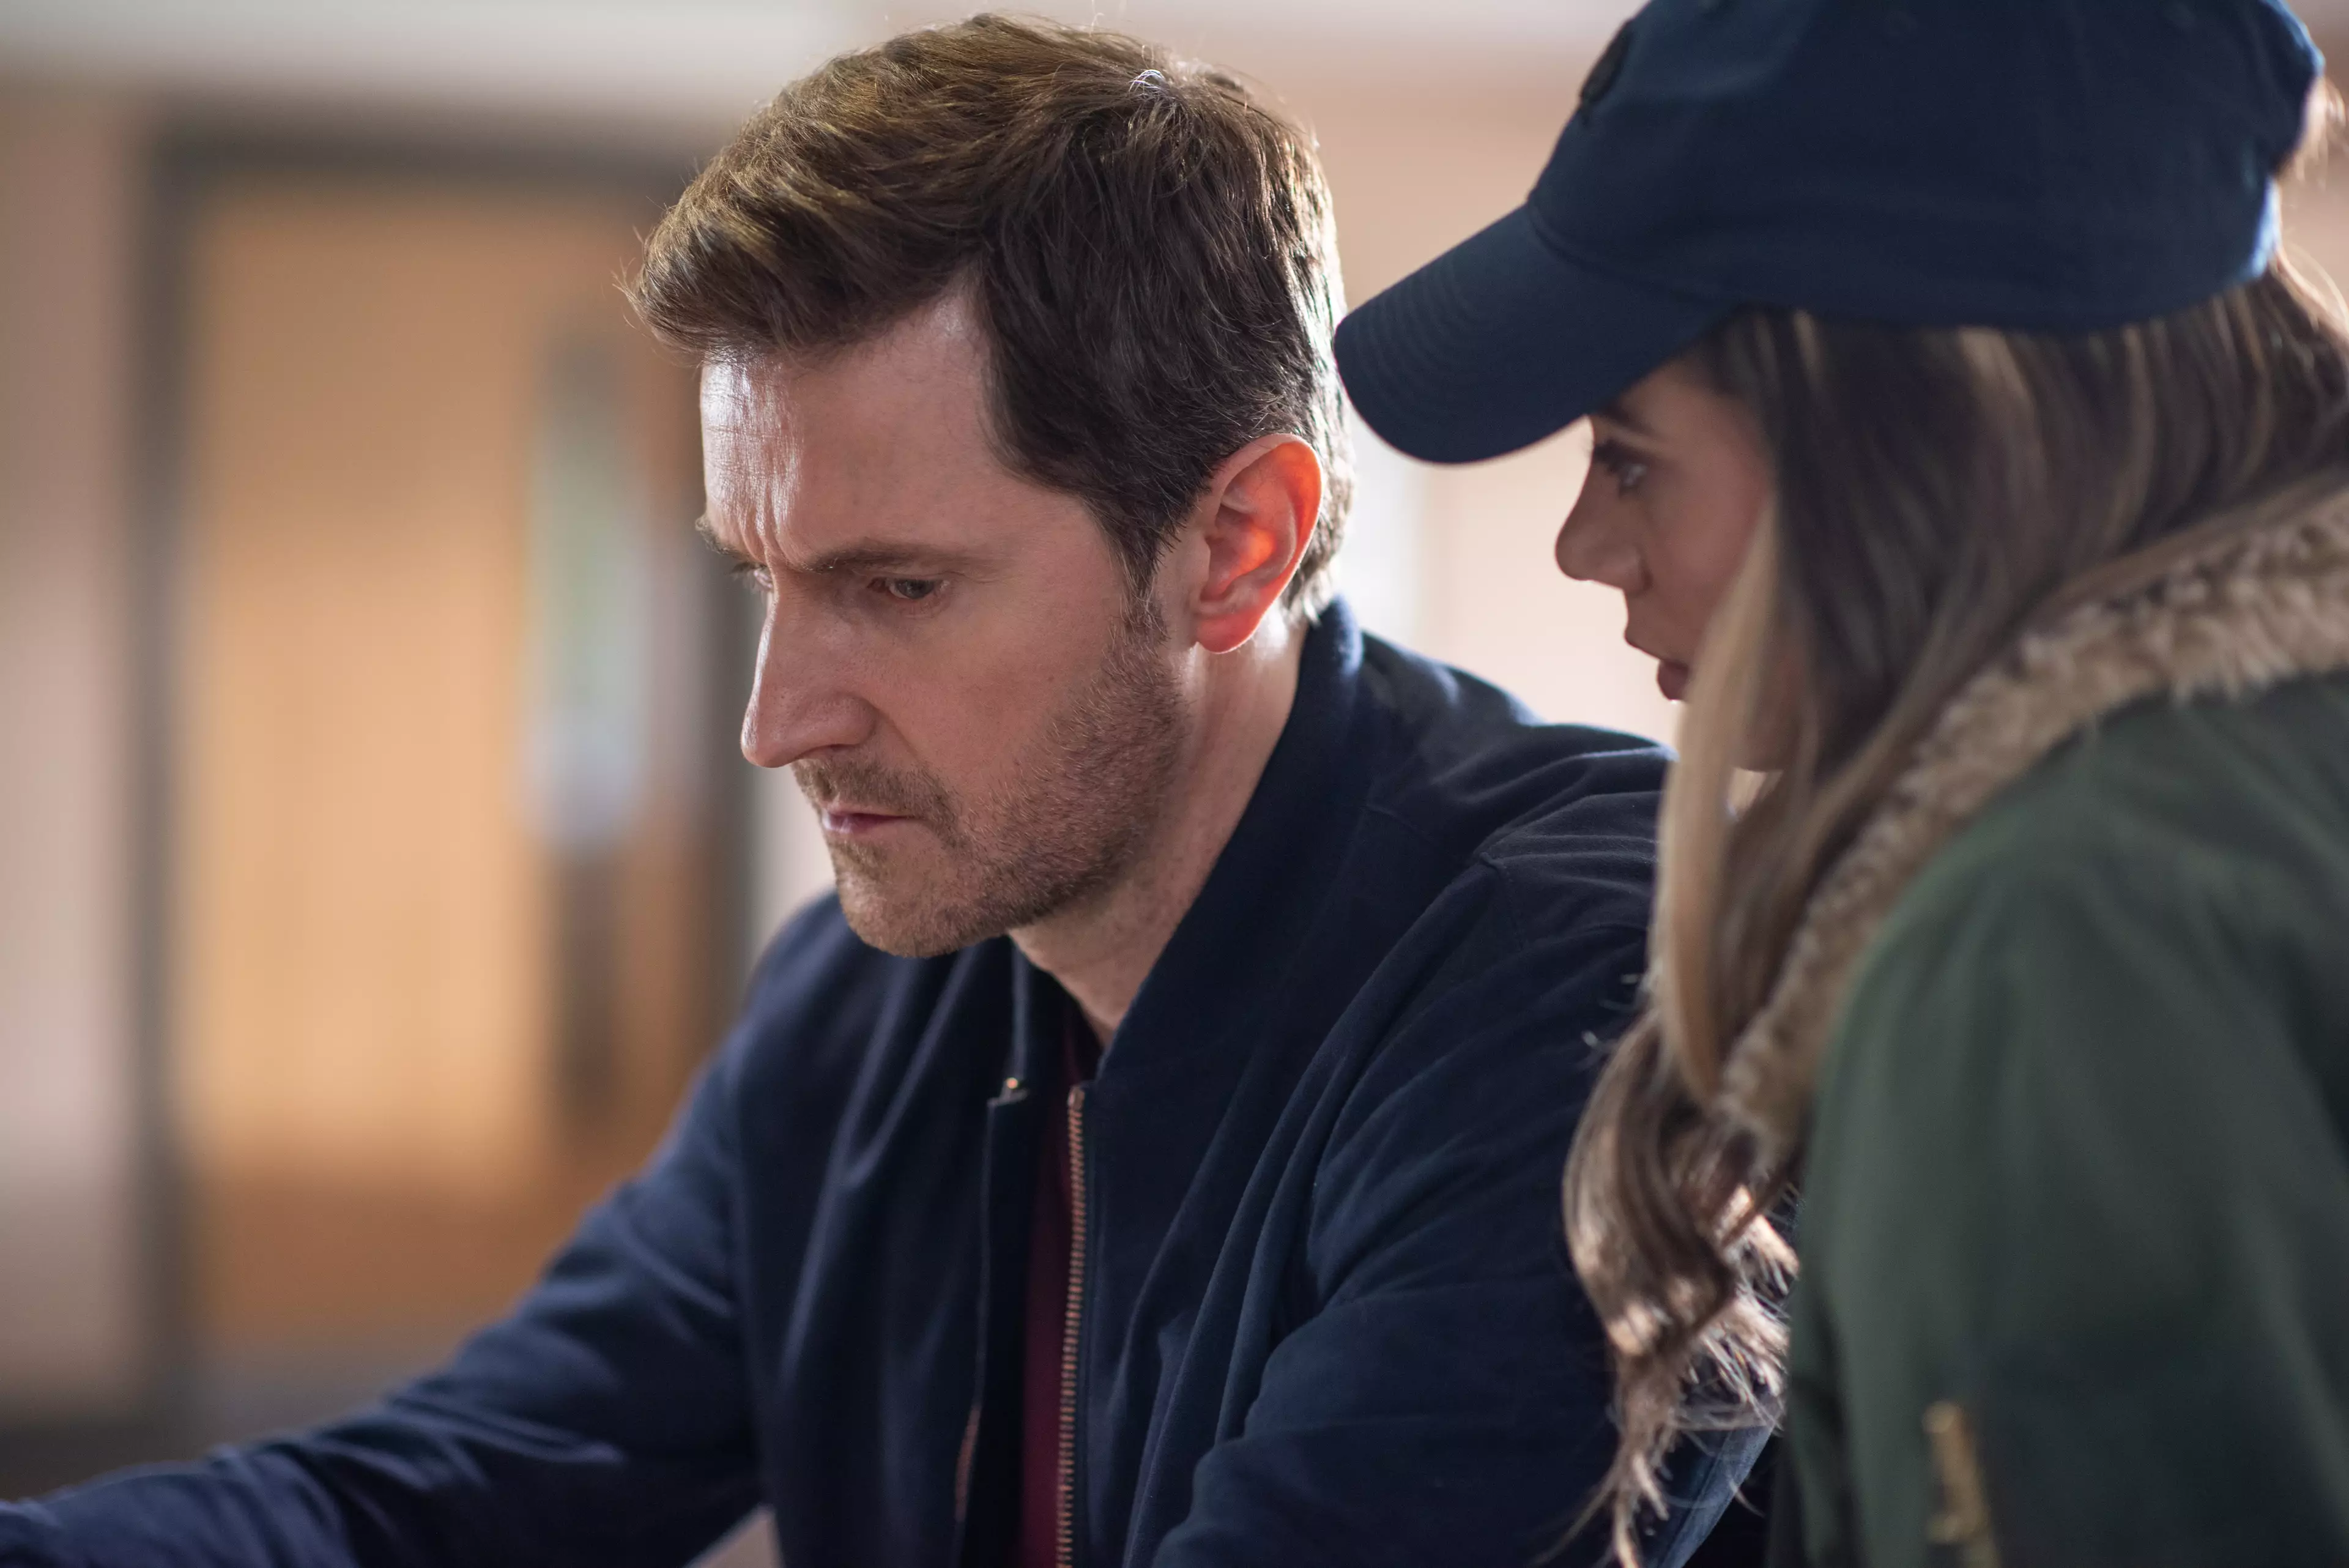 Richard Armitage plays Adam Price whose life turns upside down when a stranger unravels his wife's secret (